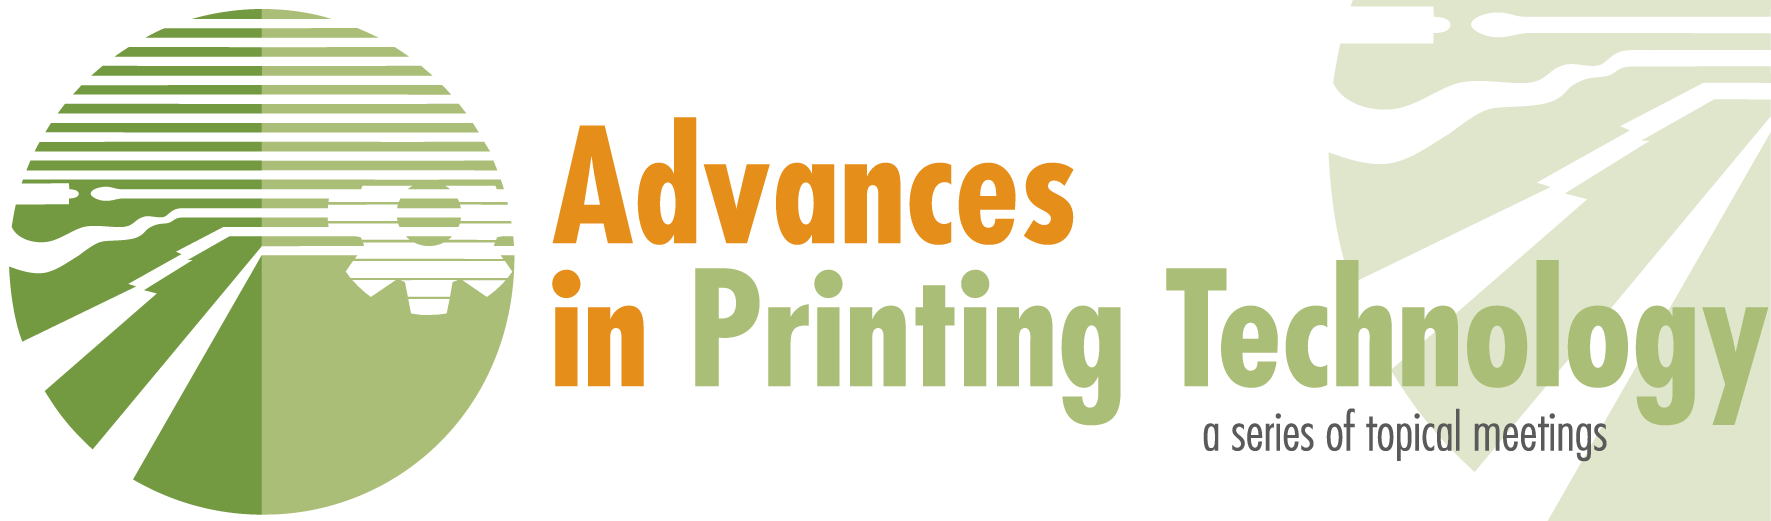 Advances in Printing Technology